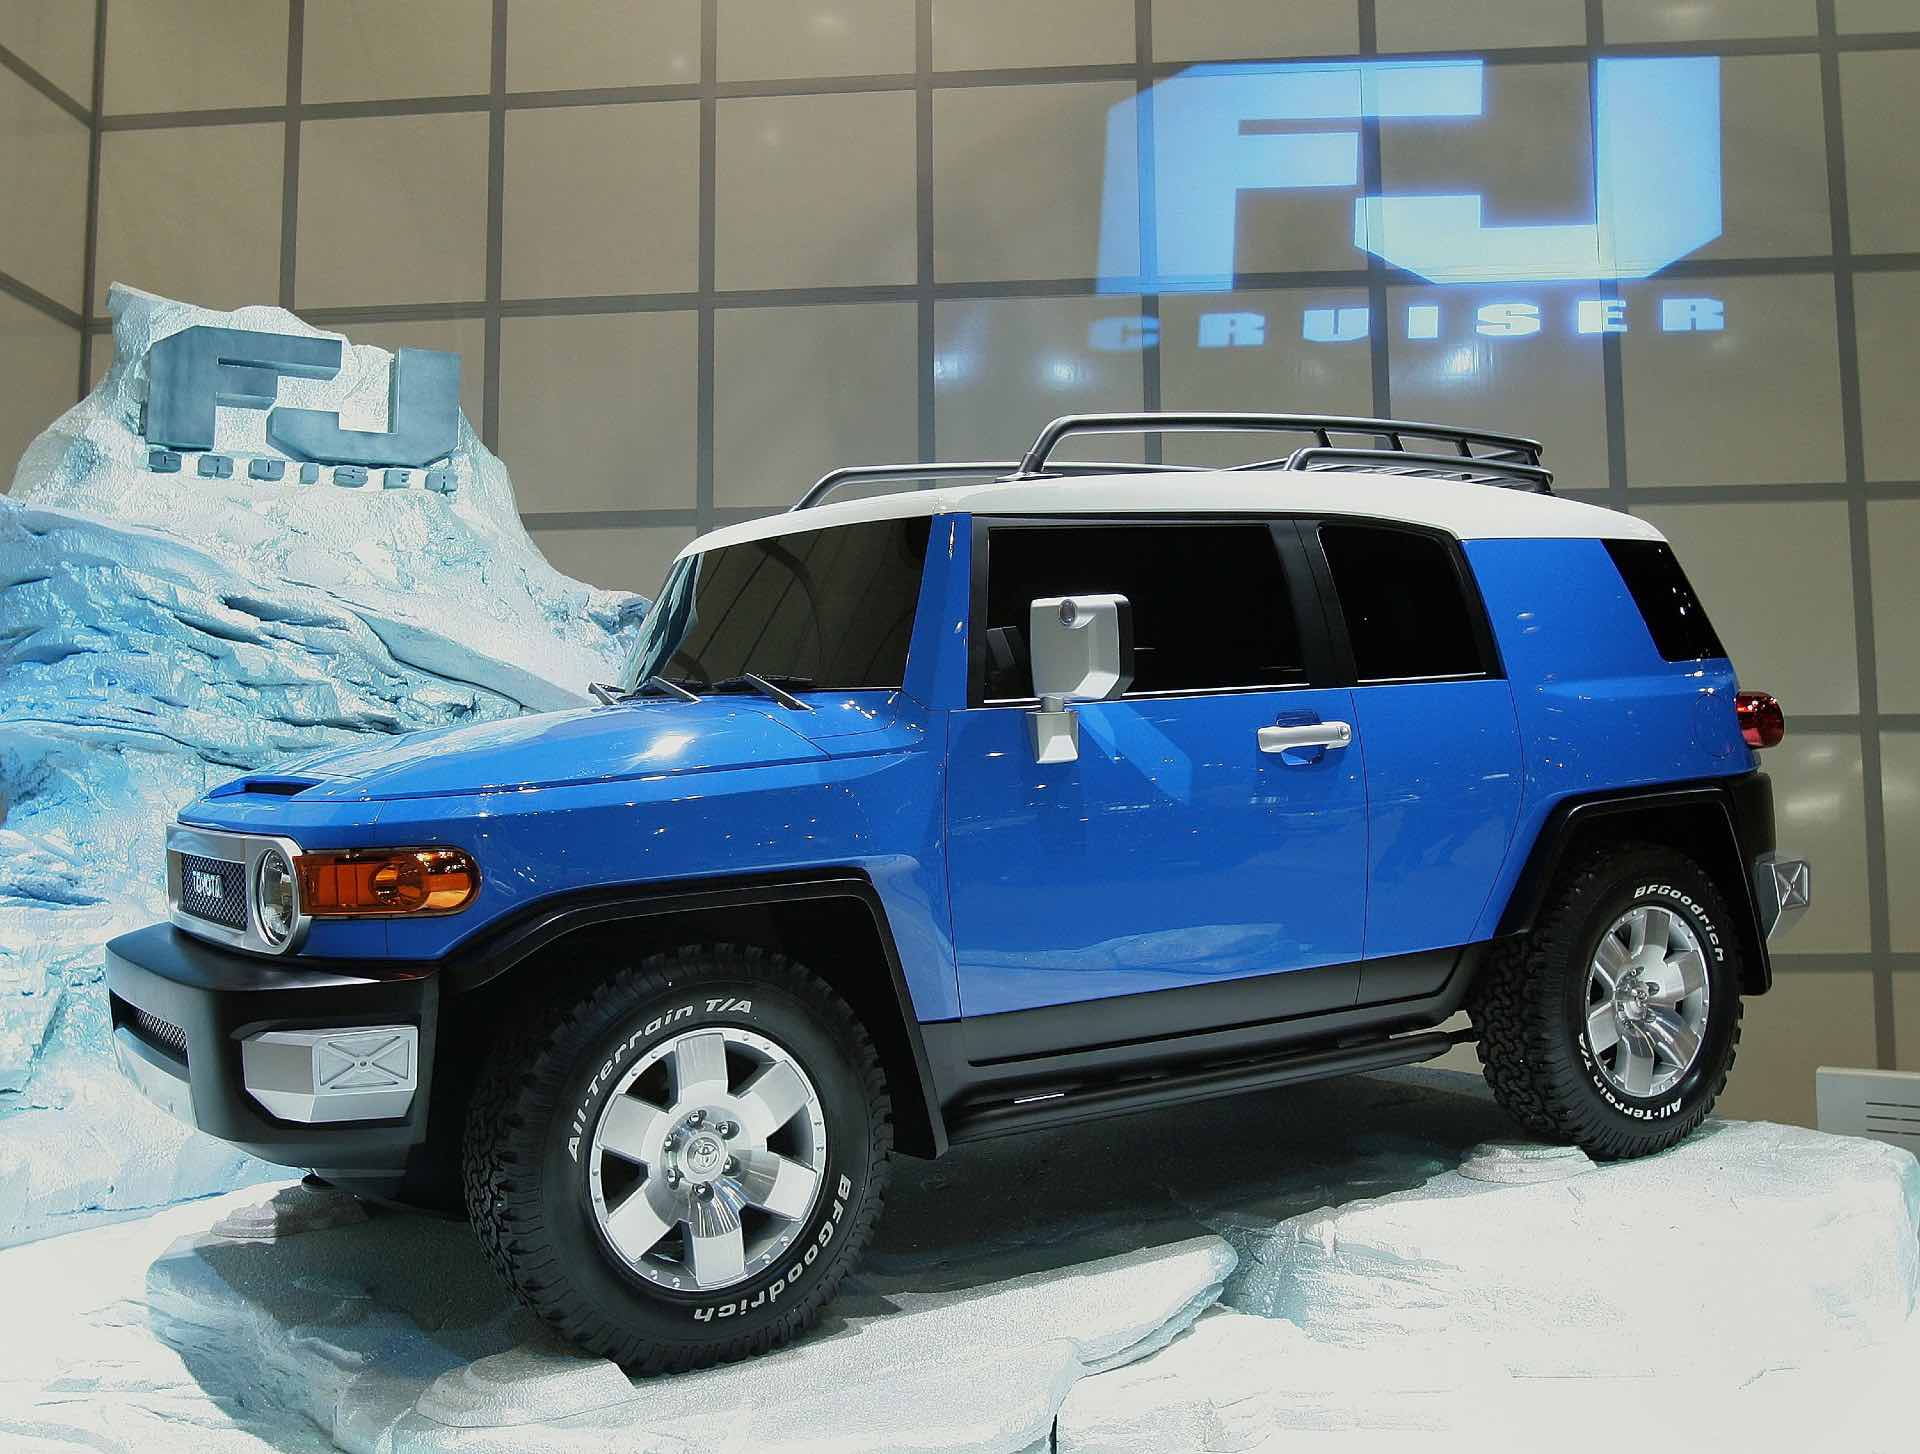 The Toyota FJ Cruiser in blue at an auto show